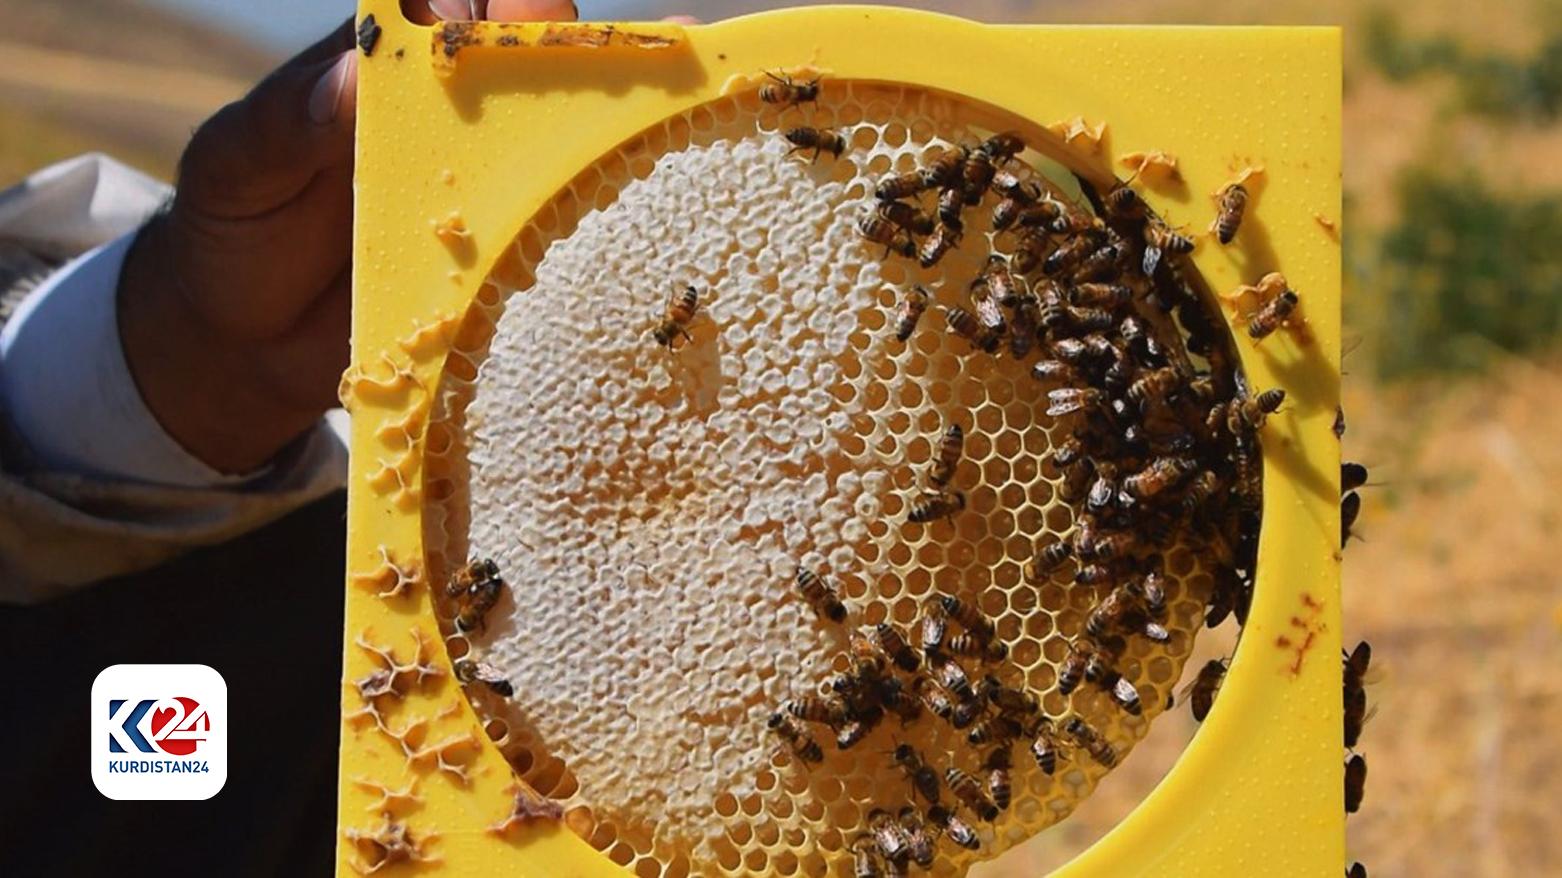 A cross section of a beehive sourced in the Kurdistan Region. (Photo: KRG)